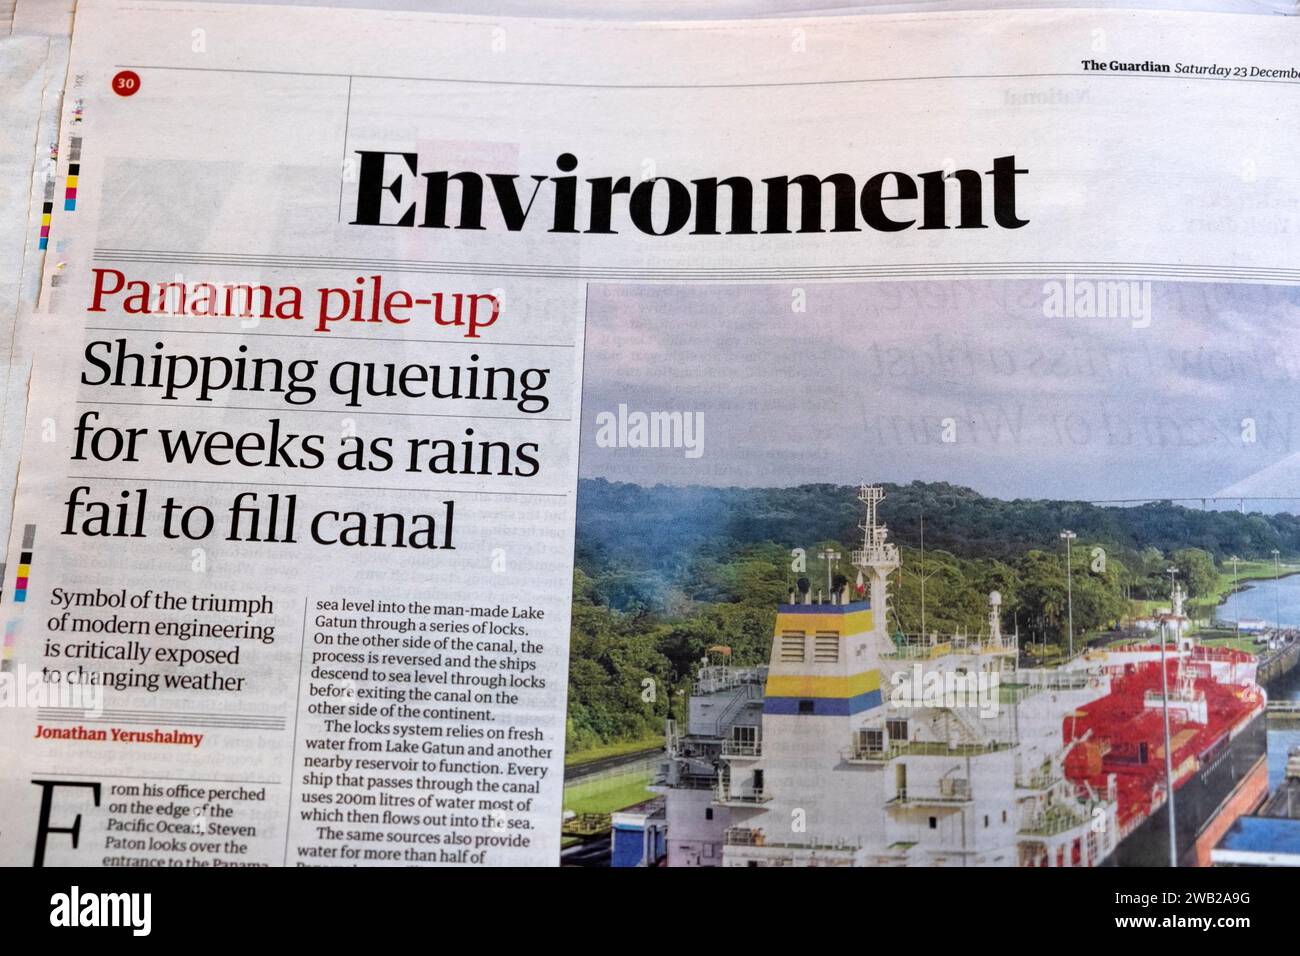 "Panama pile-up Shipping Queuing for Weeks as Raines fail to fill Canal" Guardian Newspaper headline environment articolo 23 dicembre 2023 Londra Regno Unito Foto Stock